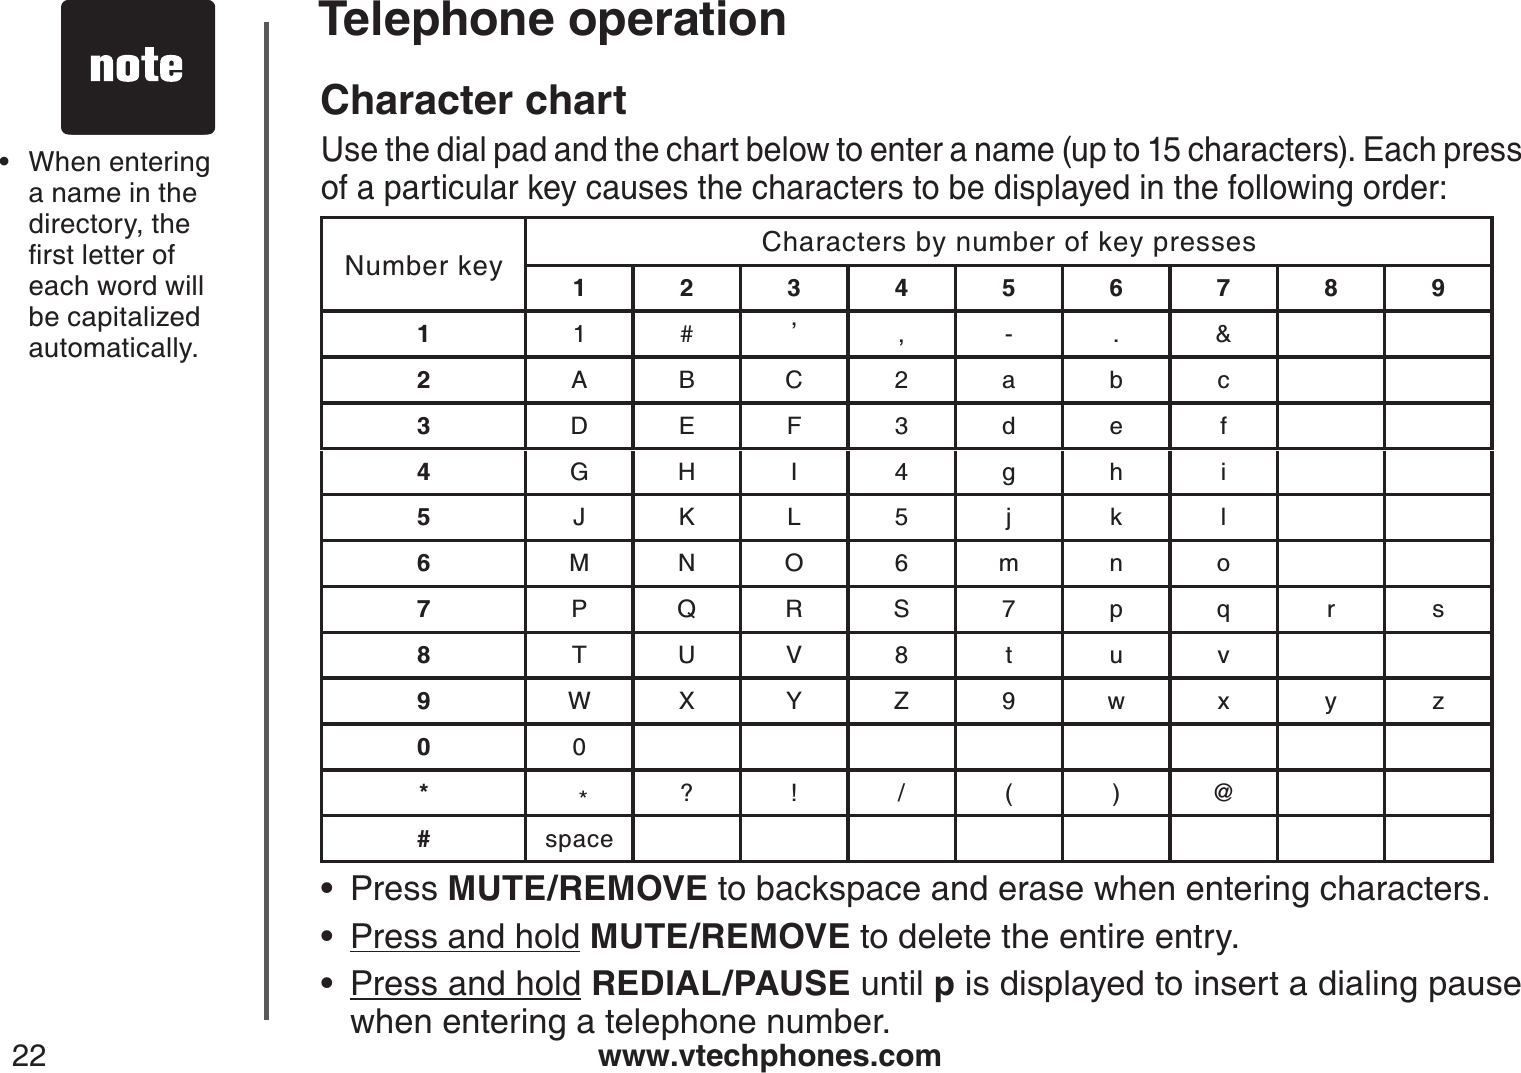 www.vtechphones.com22Telephone operationCharacter chartUse the dial pad and the chart below to enter a name (up to 15 characters). Each press of a particular key causes the characters to be displayed in the following order:Press MUTE/REMOVE to backspace and erase when entering characters. Press and hold MUTE/REMOVE to delete the entire entry.  Press and hold REDIAL/PAUSE until pis displayed to insert a dialing pause when entering a telephone number. •••Number key Characters by number of key presses12345678911# ,,-.&amp;2ABC2abc3DEF3de f4GHI 4gh i5JKL5 j k l6MNO6mn o7PQRS7pq r s8TUV8 t u v9WX Y Z 9 w x y z00**?! /()@#spaceWhen entering a name in the directory, the ſTUVNGVVGTQHeach word will be capitalized automatically.•